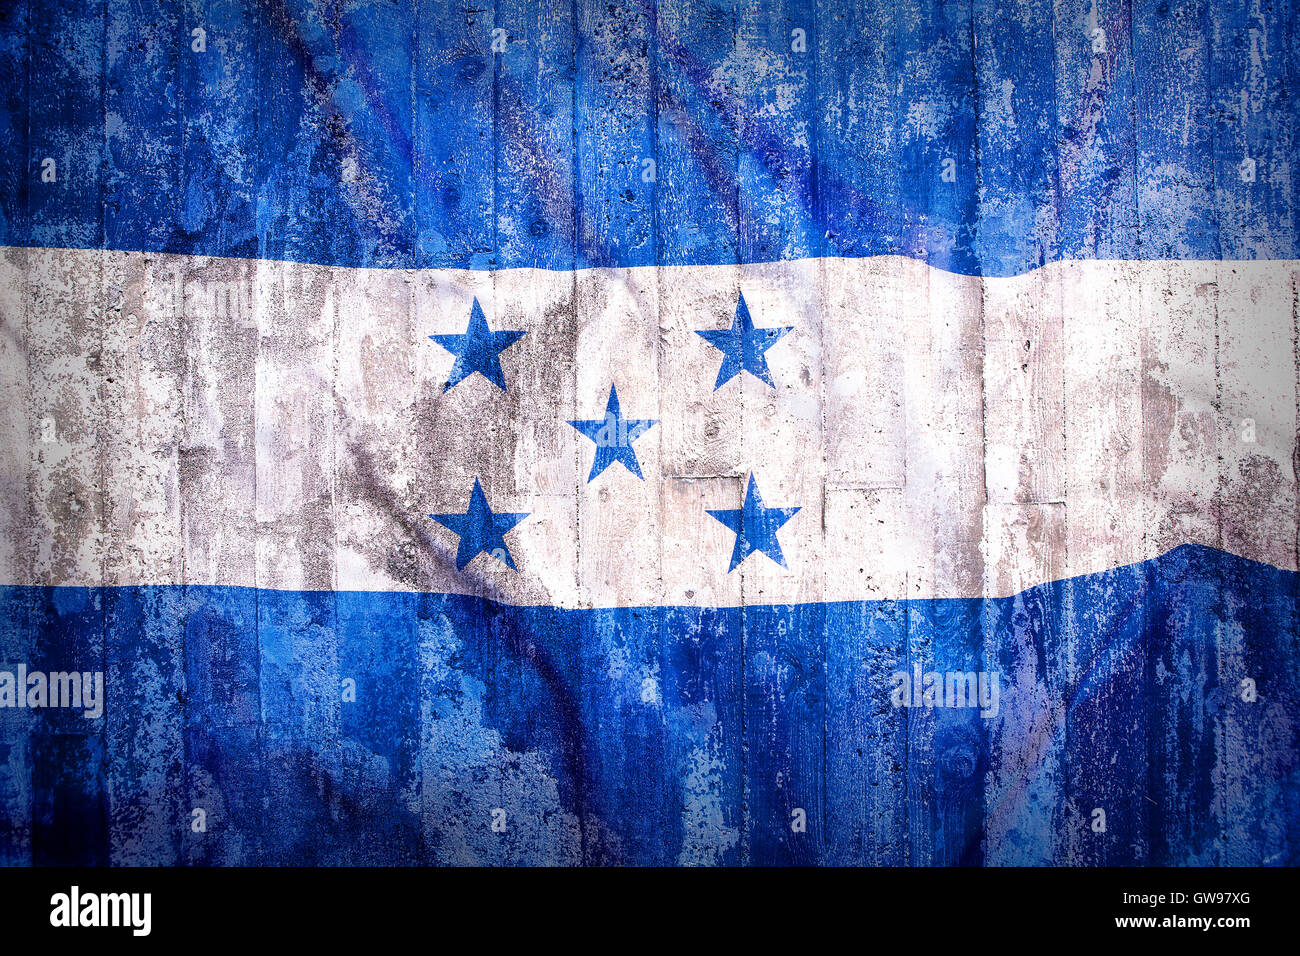 Grunge style of Honduras flag on a brick wall for background Stock Photo